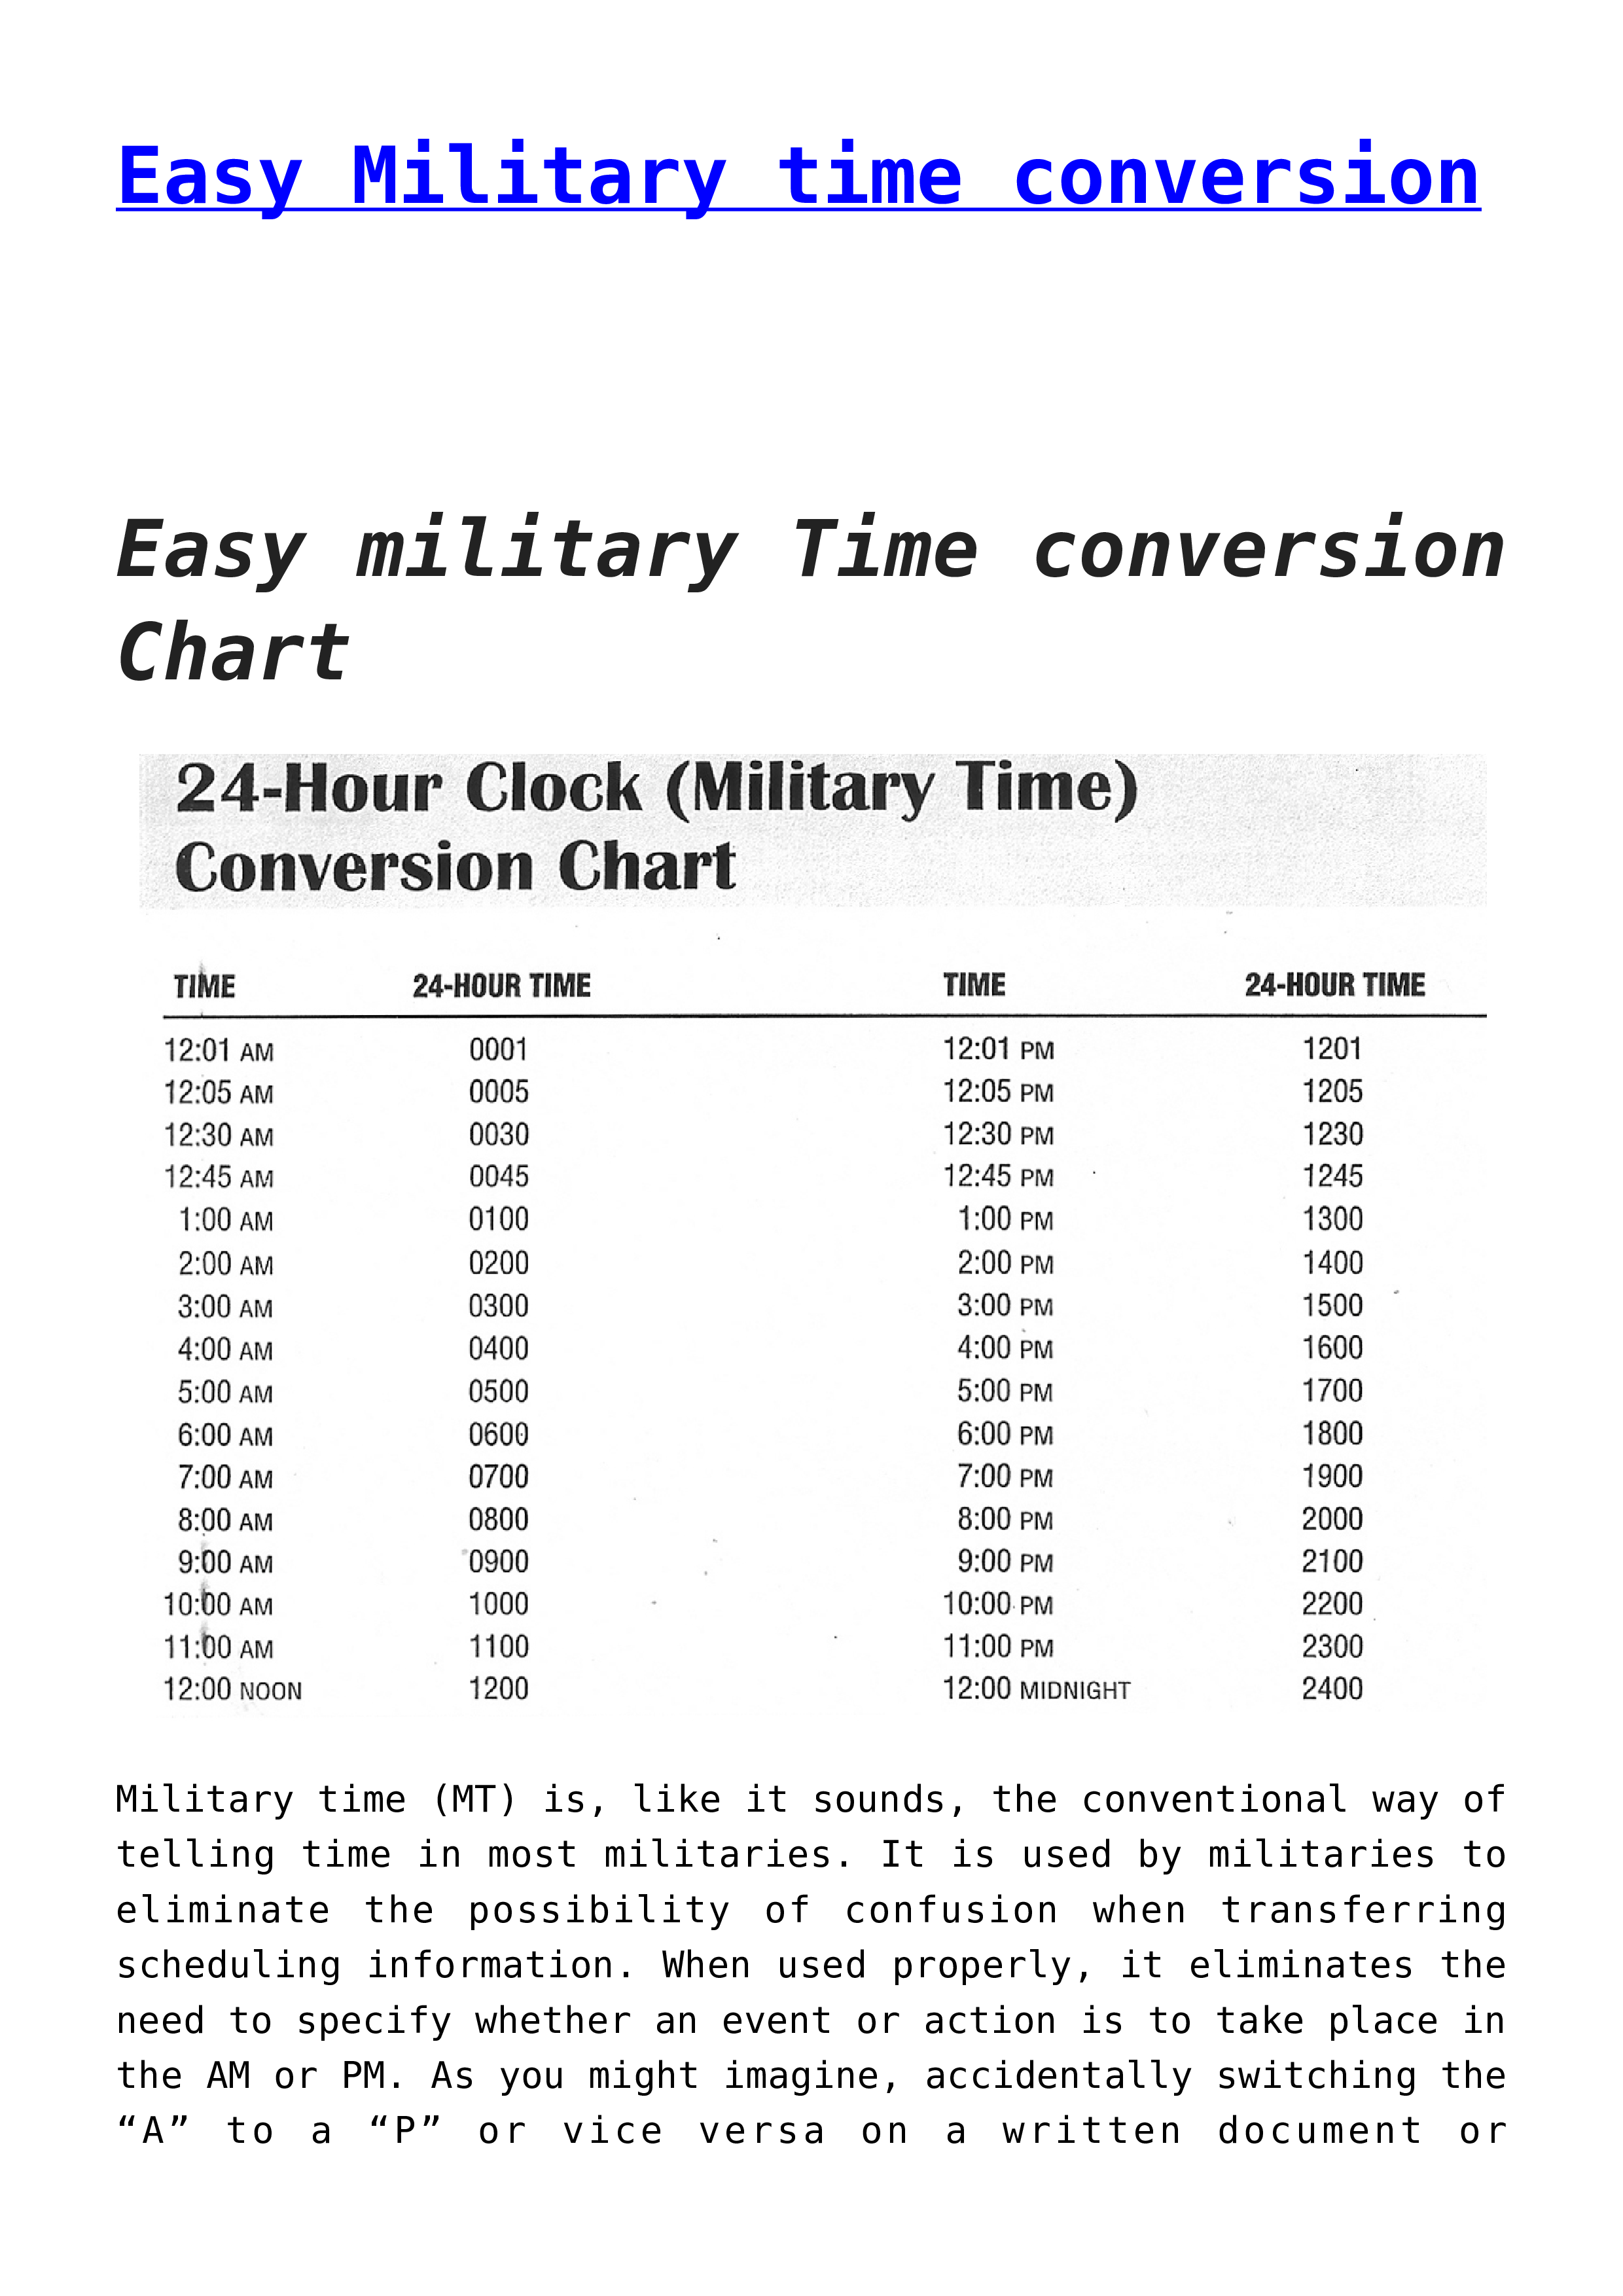 easy military time conversion chart template